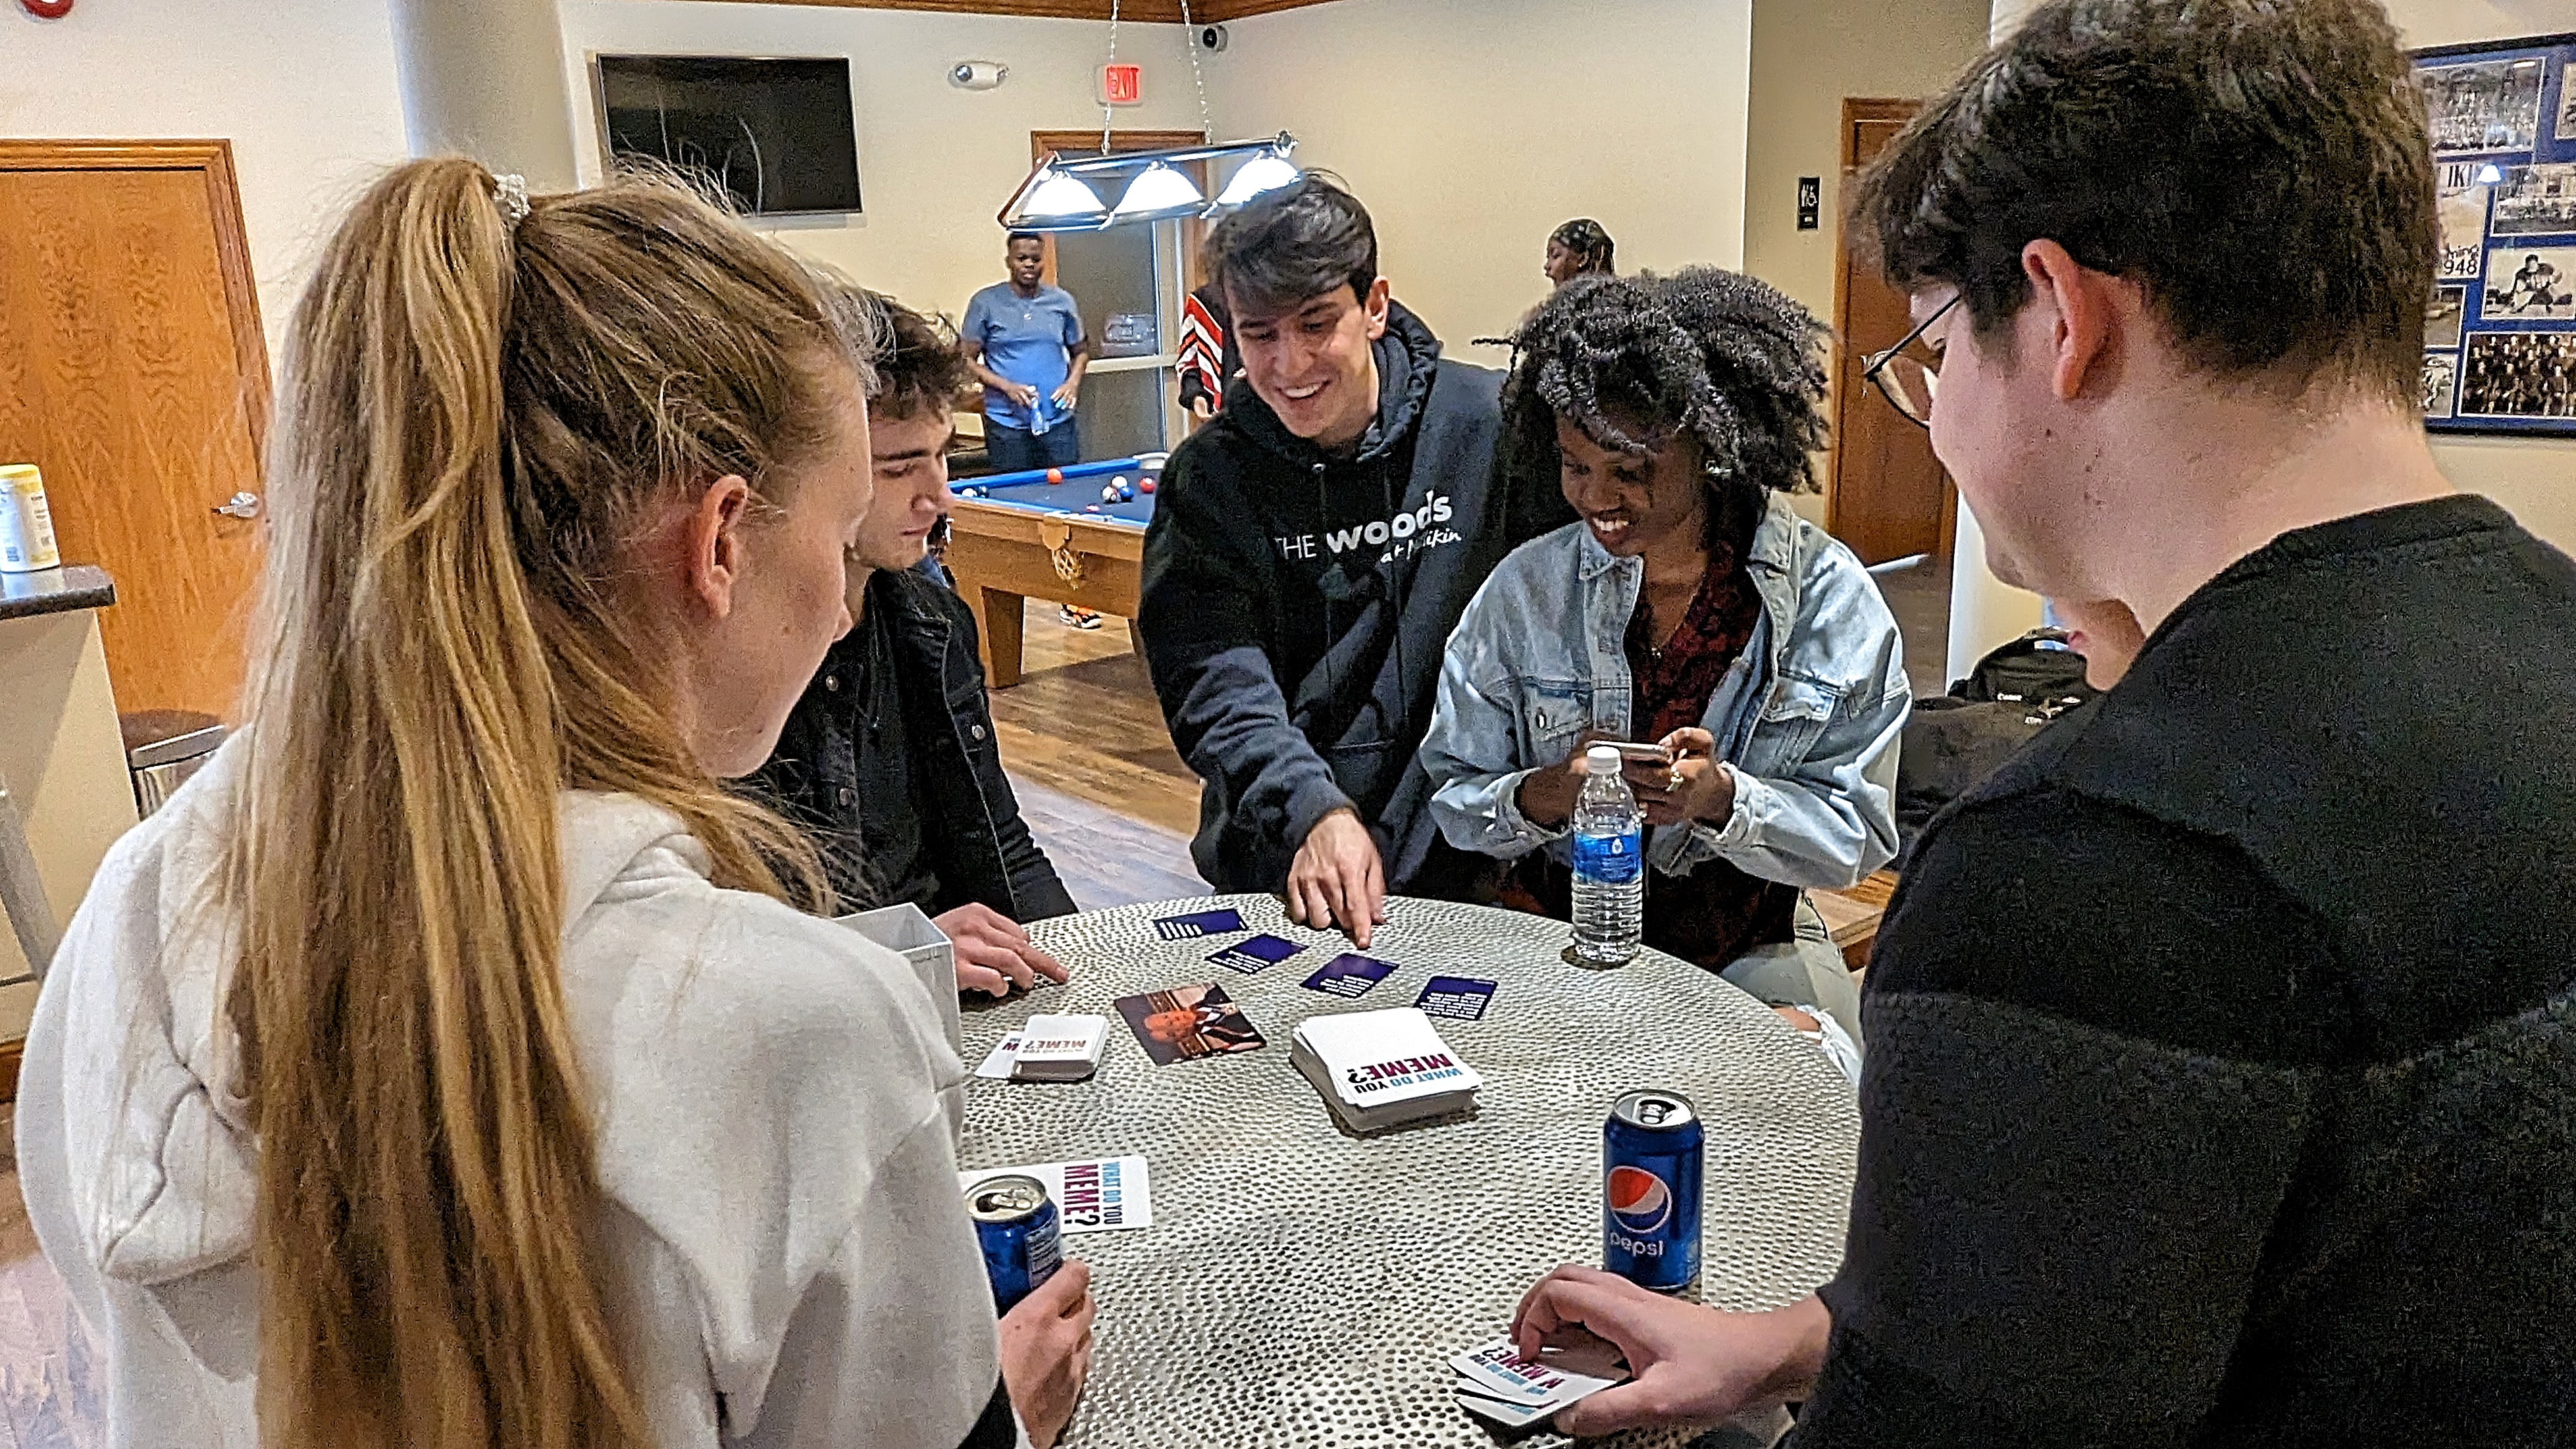 Students playing a card game